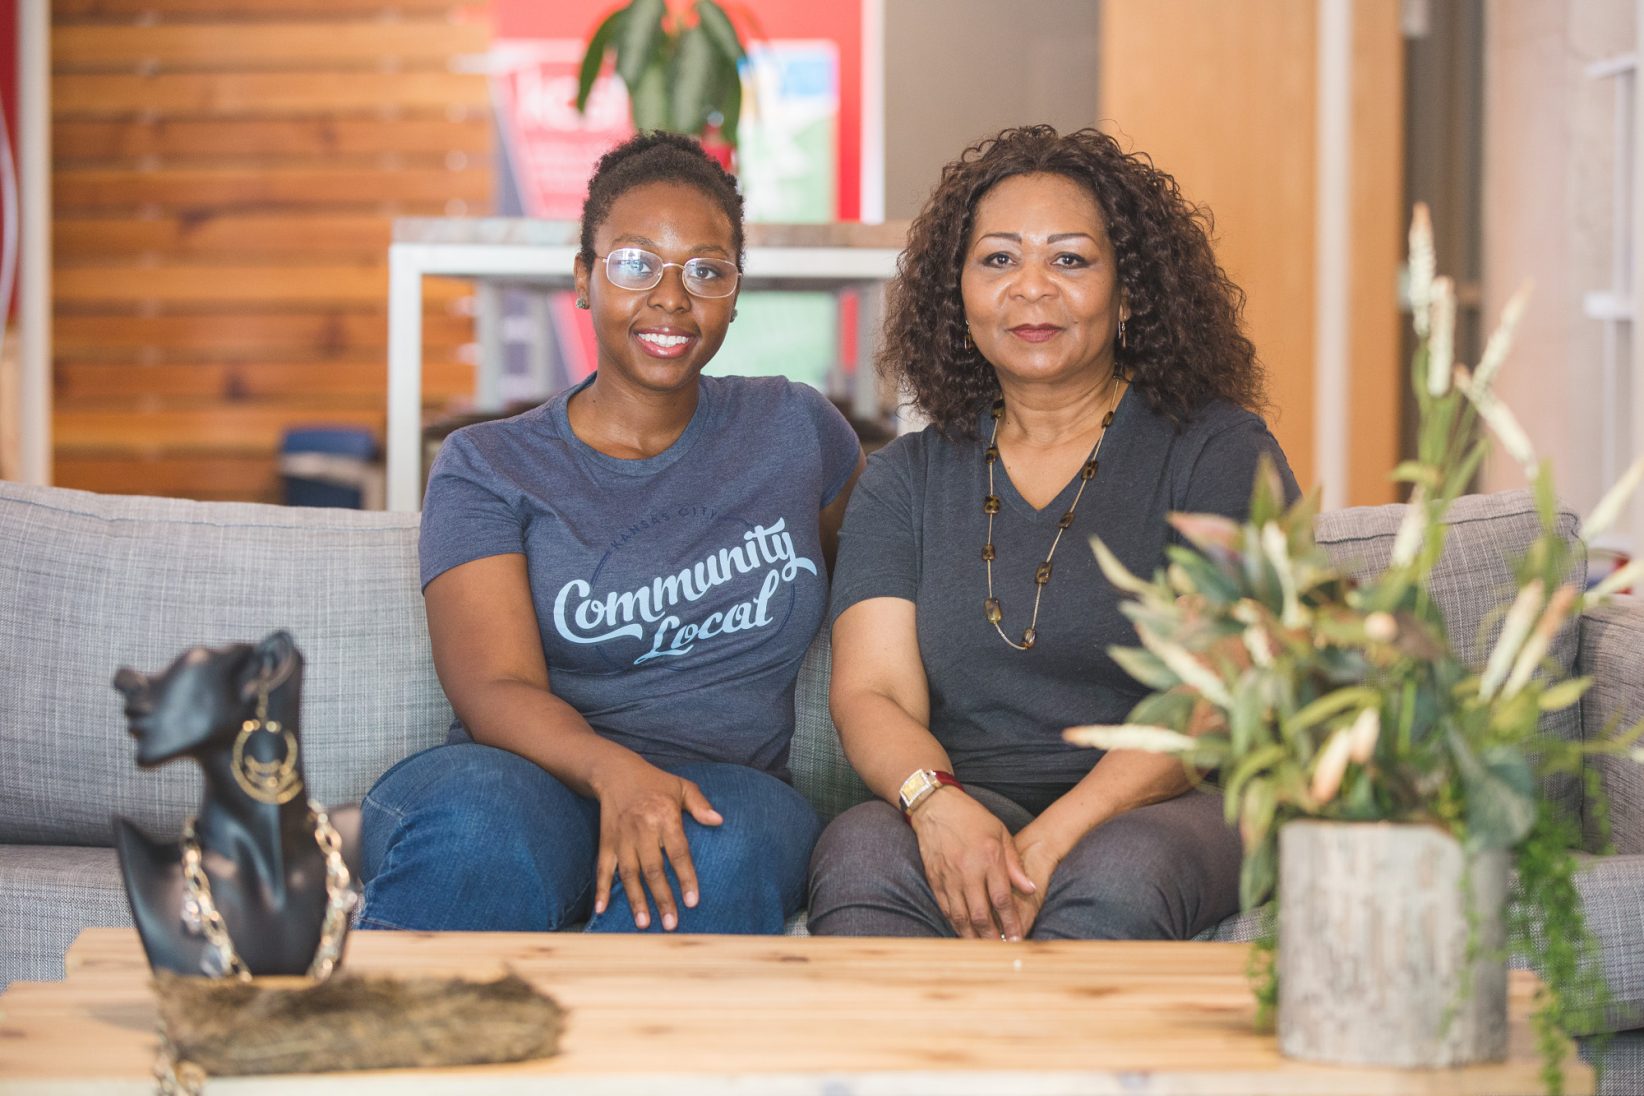 Mother-daughter businesses connected by sustainability, faith, yearning for community